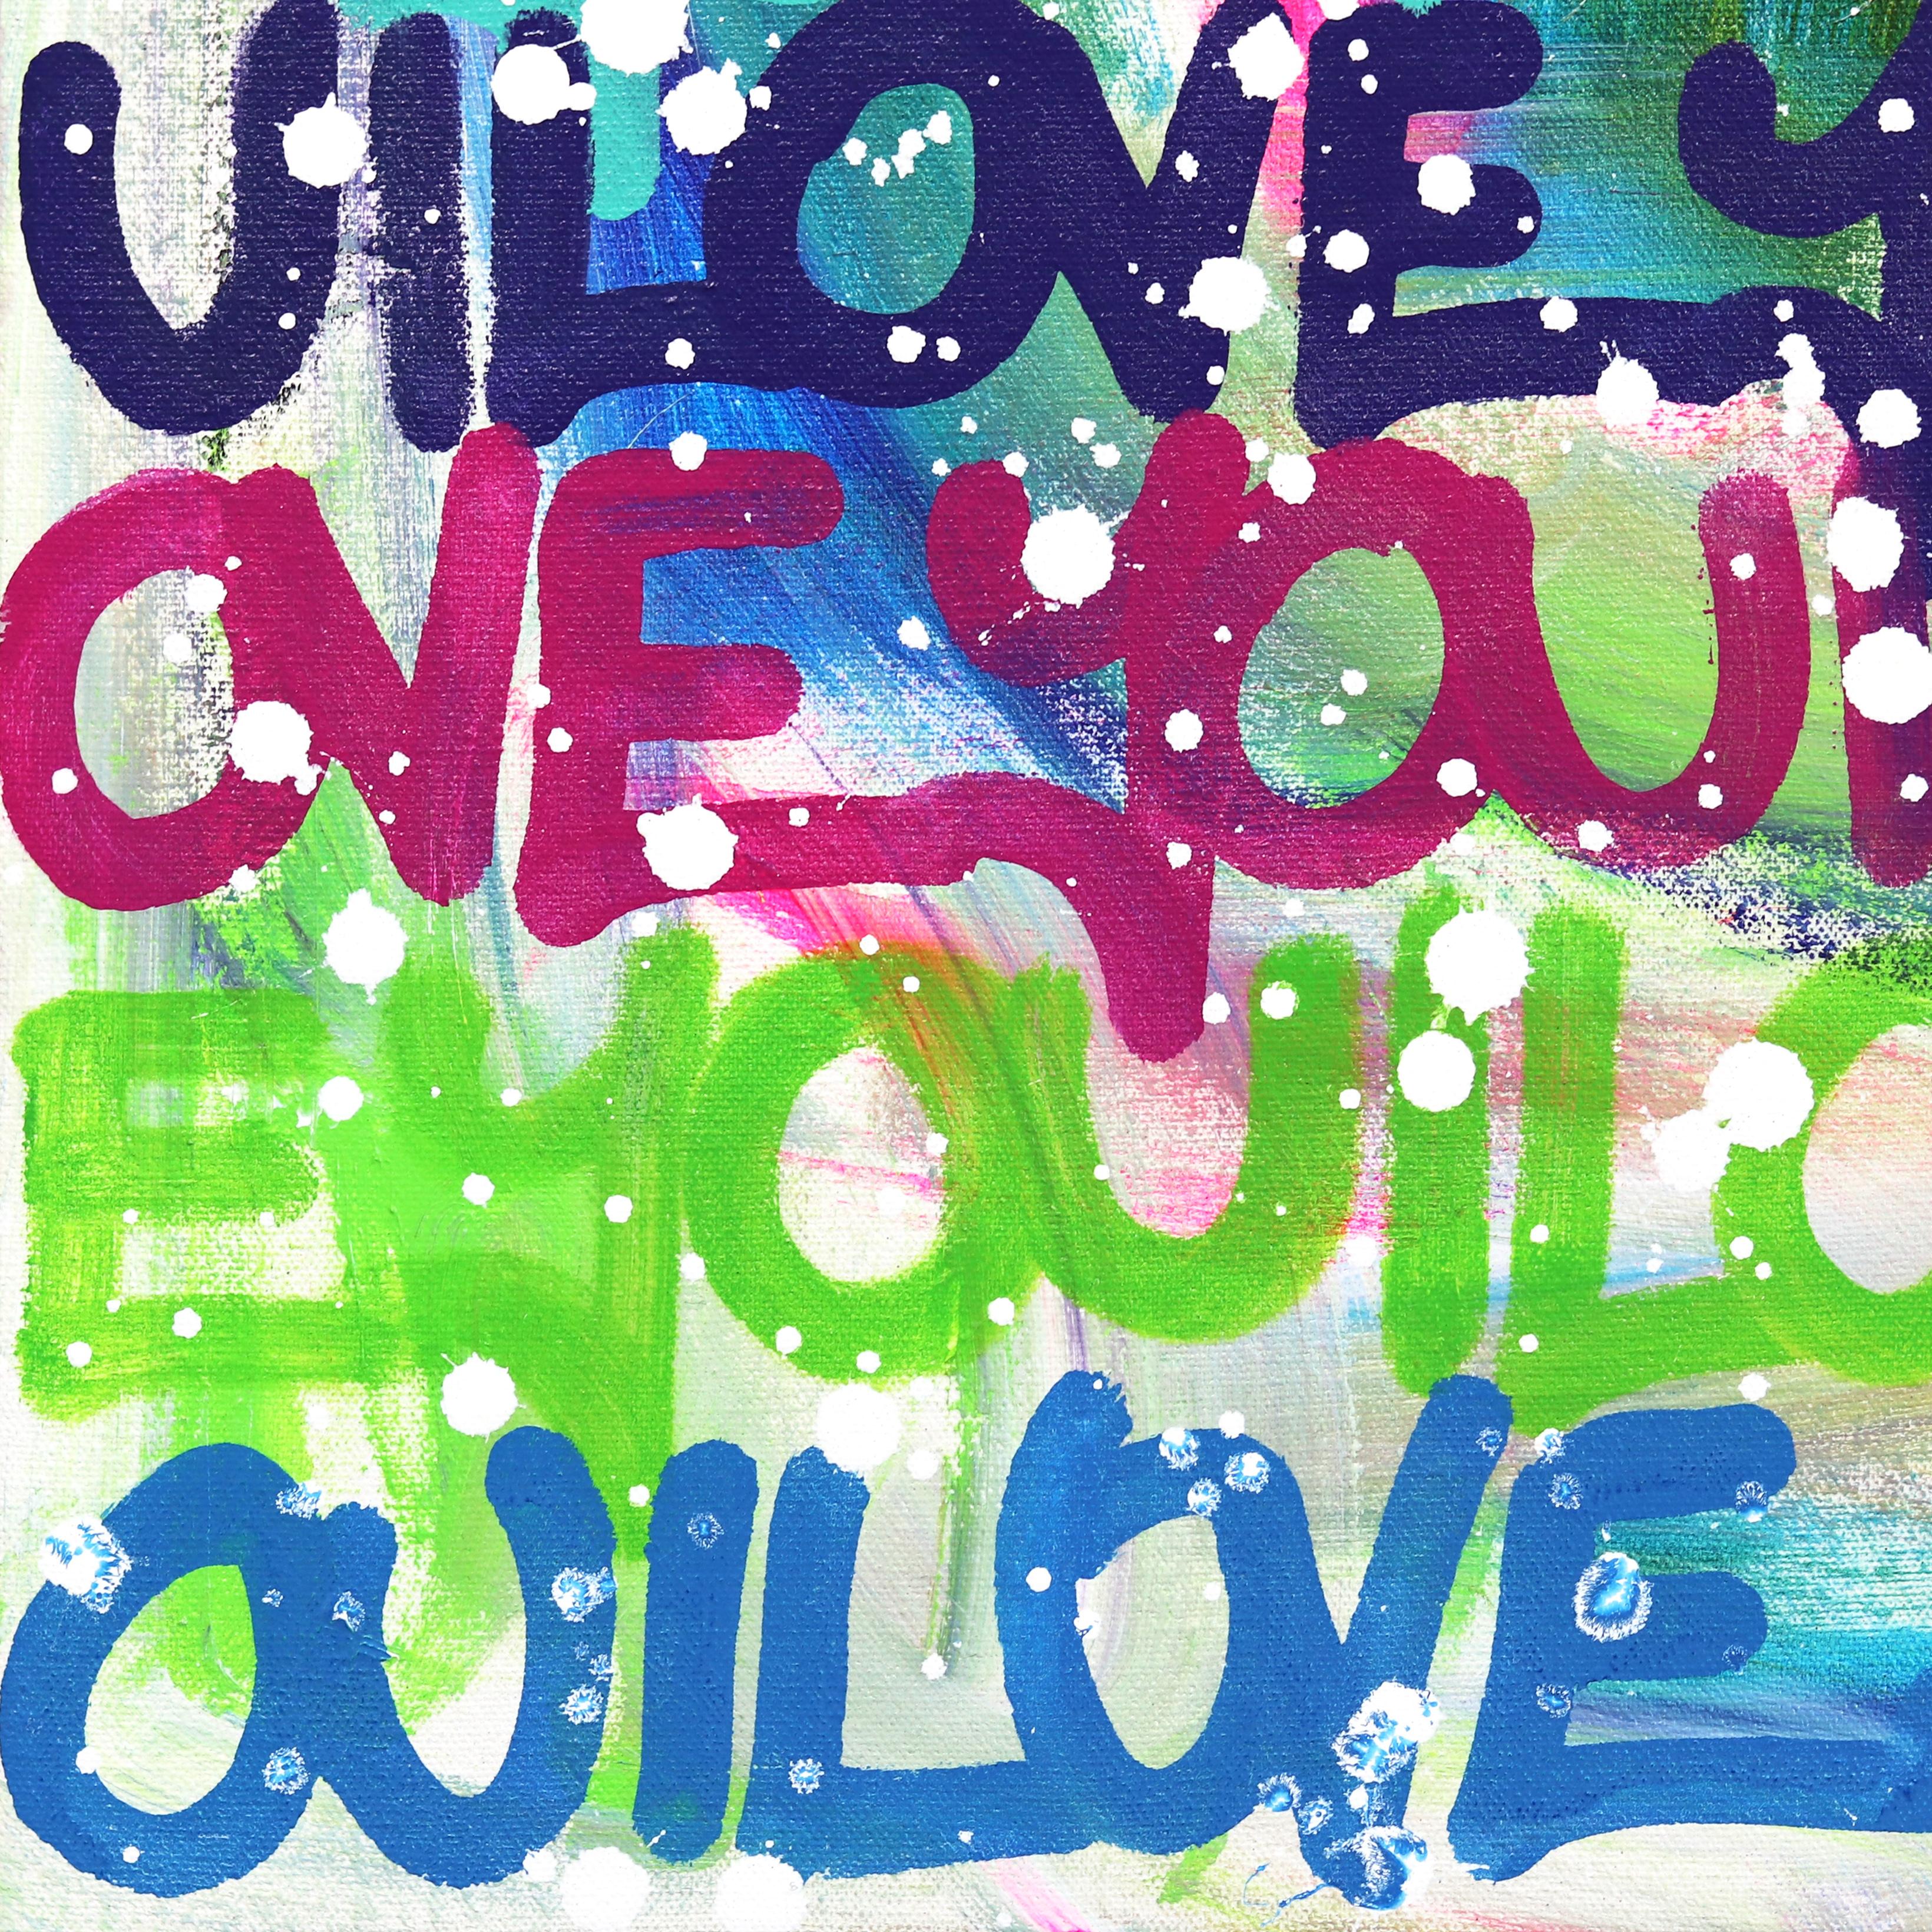 Show Your Colorful Side - Colorful Original Love Graffiti Painting on Canvas For Sale 4